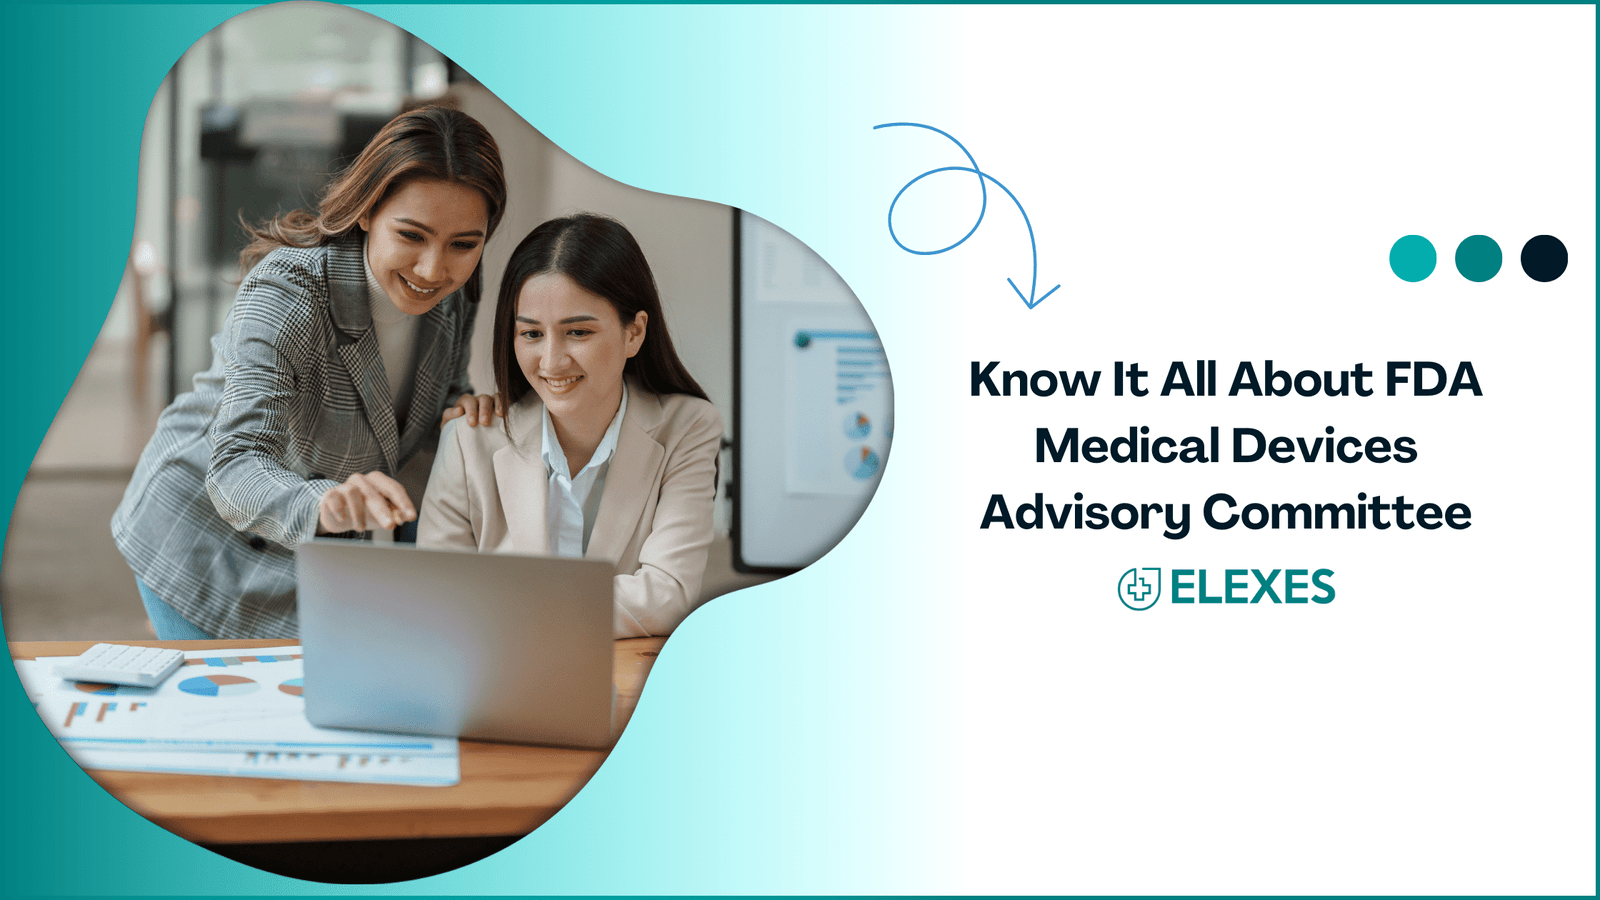 Know It All About FDA Medical Devices Advisory Committee